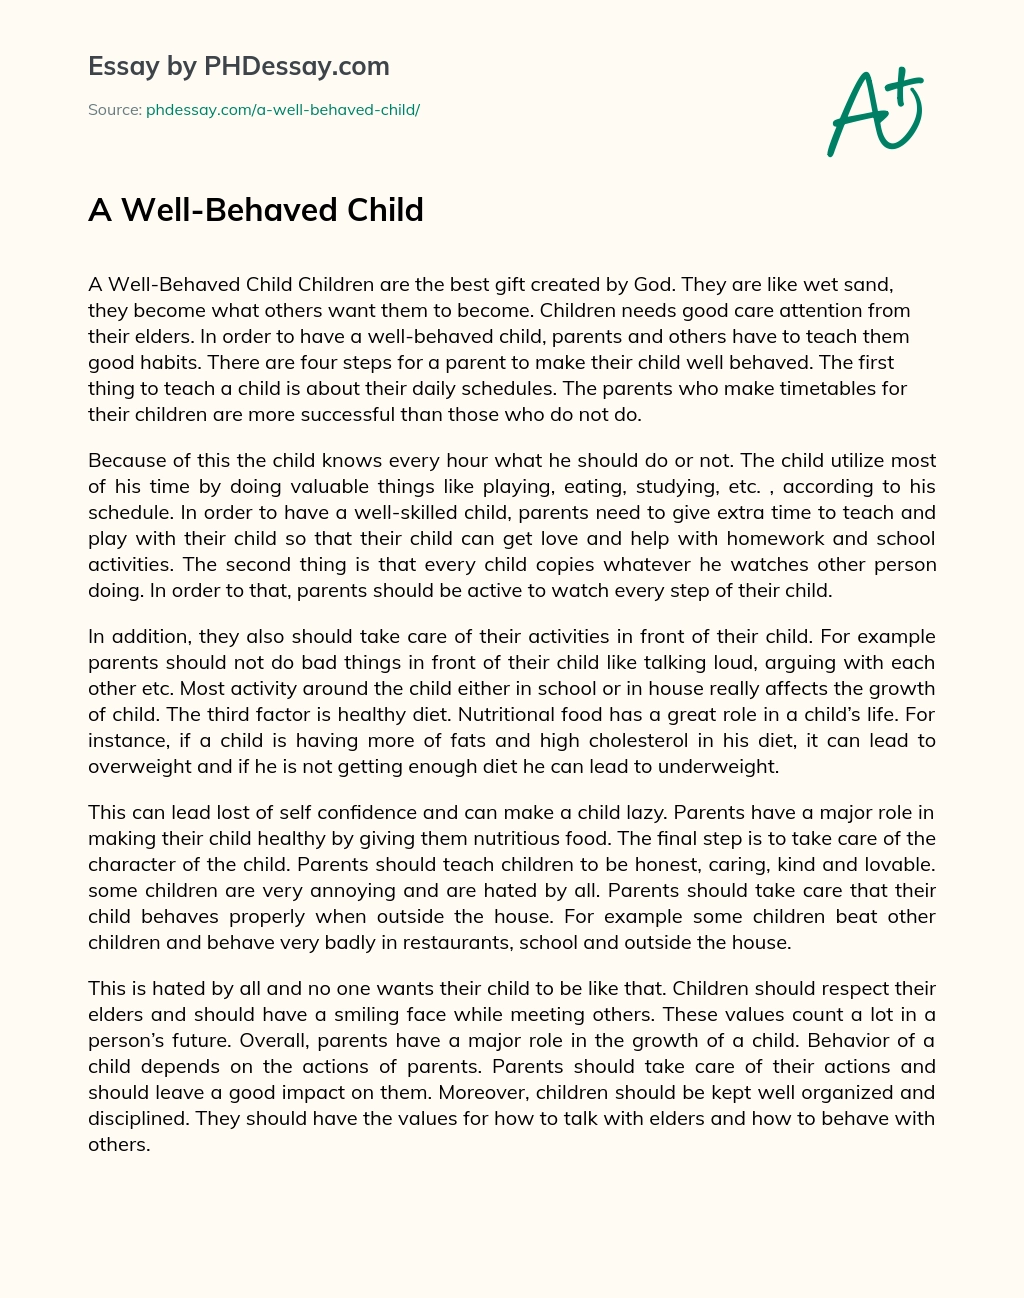 A Well-Behaved Child essay